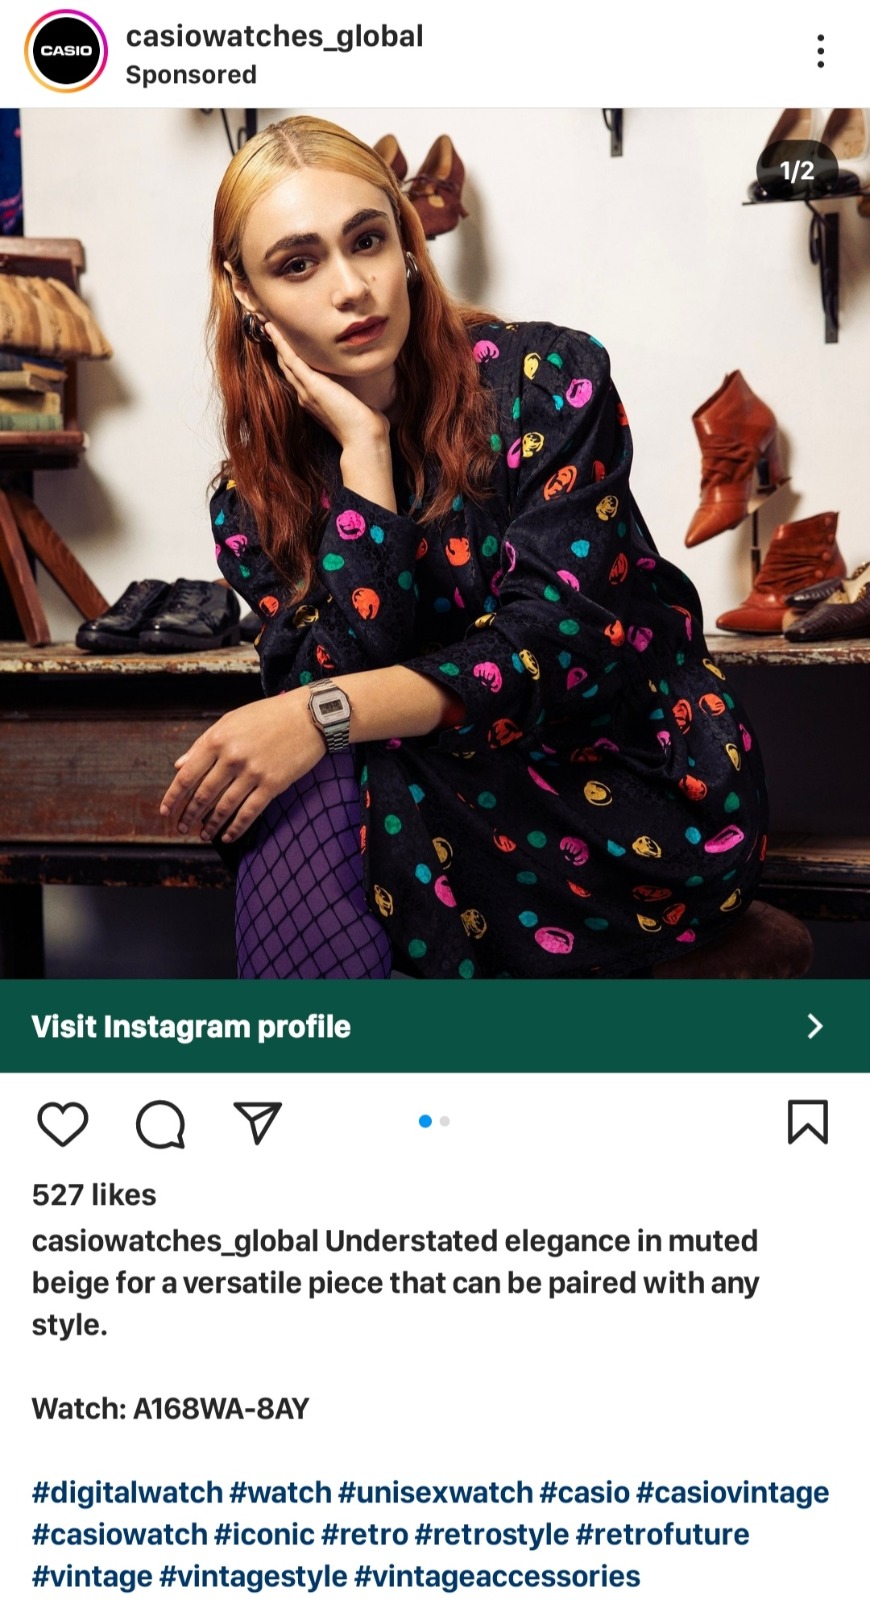 Instagram Carousel Ads dimensions